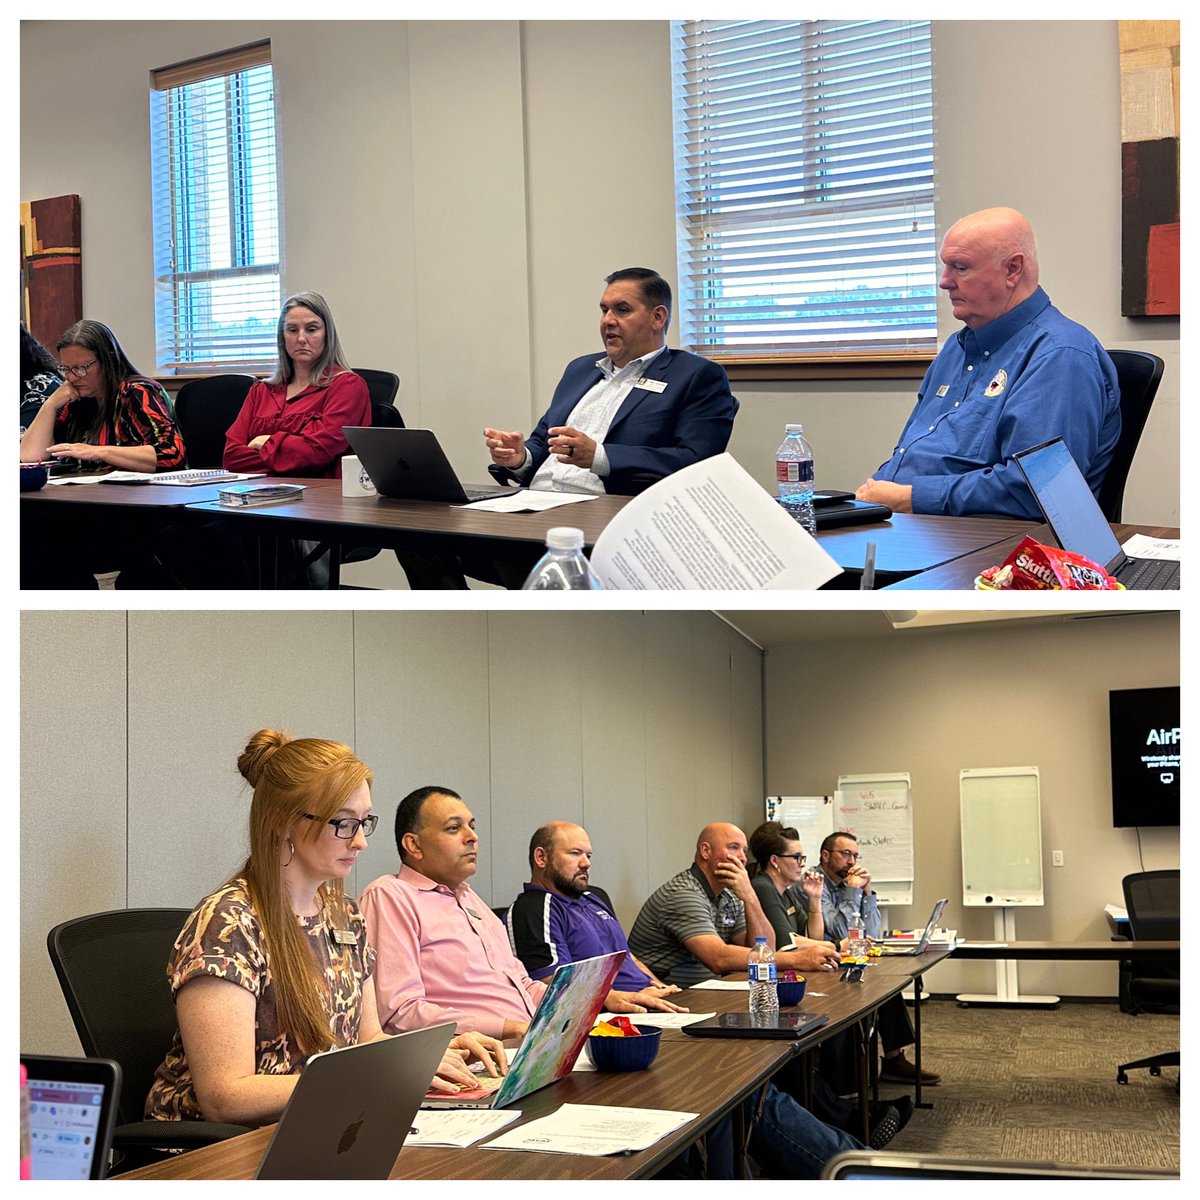 SWAEC superintendents enjoyed updates from Dennis Copeland, director of AR Rural Ed Association, and Dr. Mike Hernandez, director of AAEA, during our April board meeting.